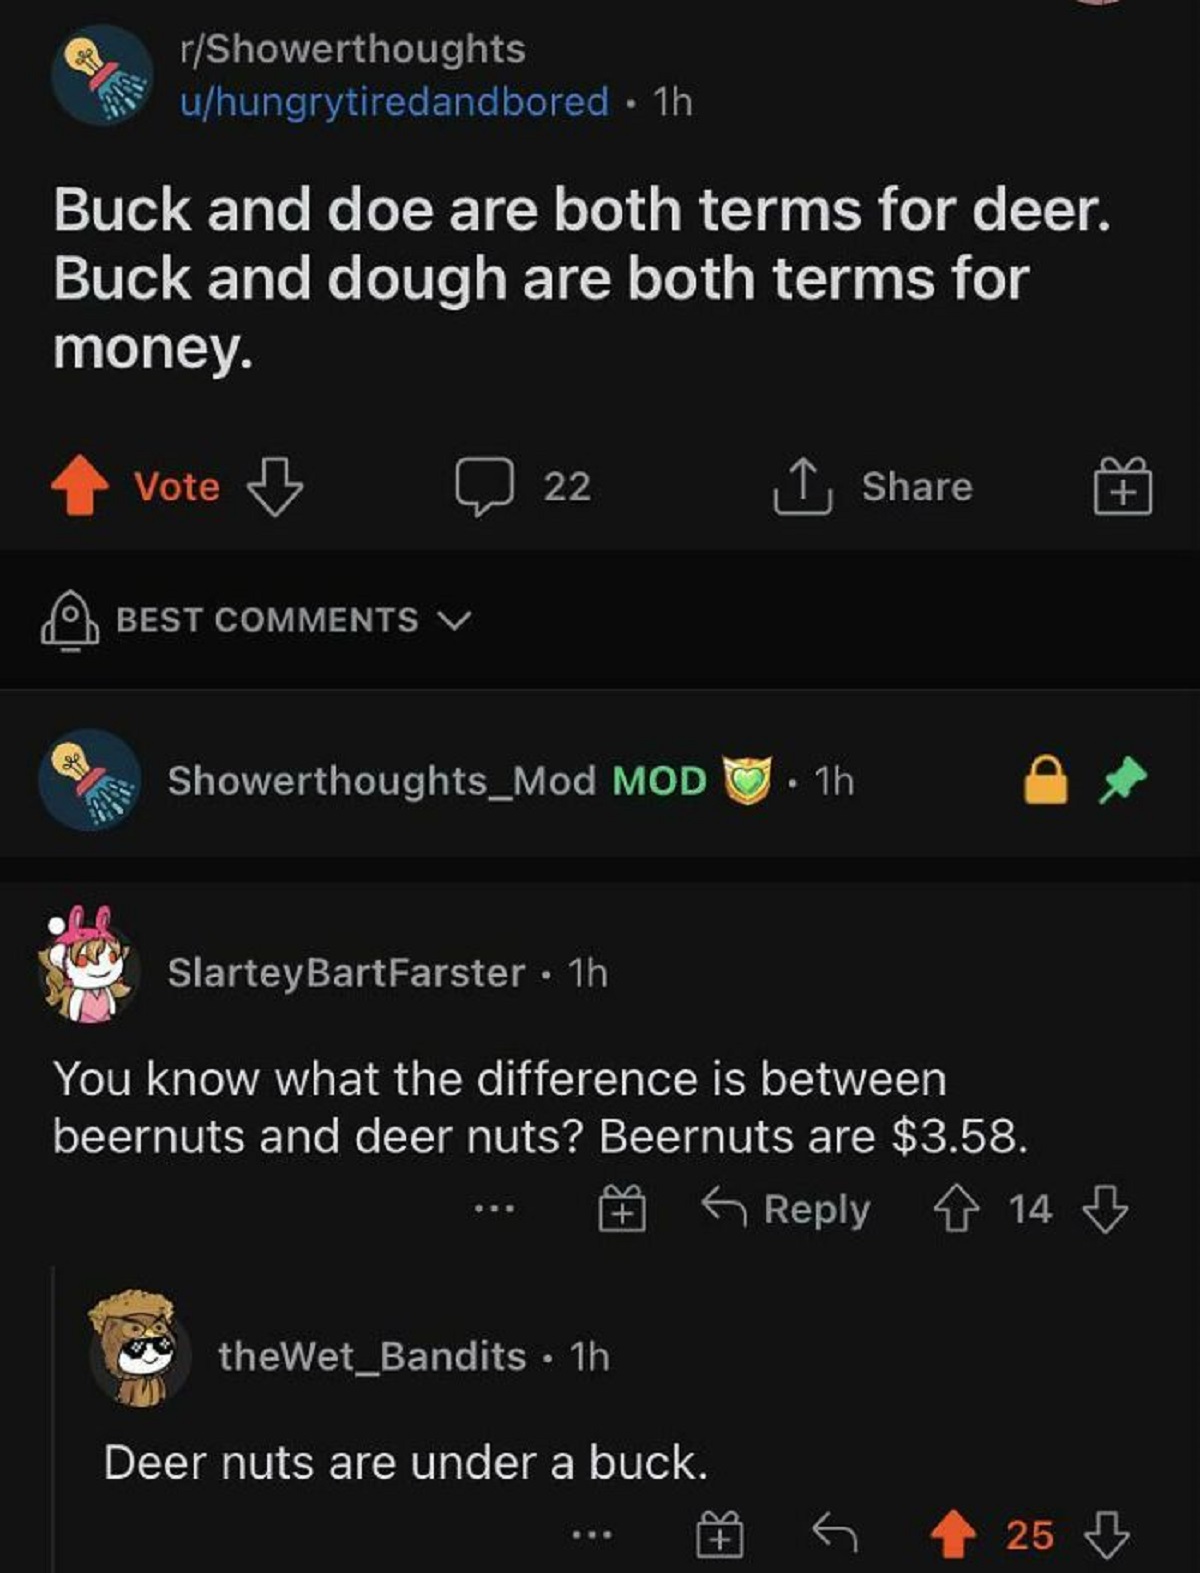 funny replies better than the original - screenshot - rShowerthoughts uhungrytiredandbored. 1h. Buck and doe are both terms for deer. Buck and dough are both terms for money. Vote Best 22 Showerthoughts_Mod Mod. 1h SlarteyBartFarster. 1h You know what the